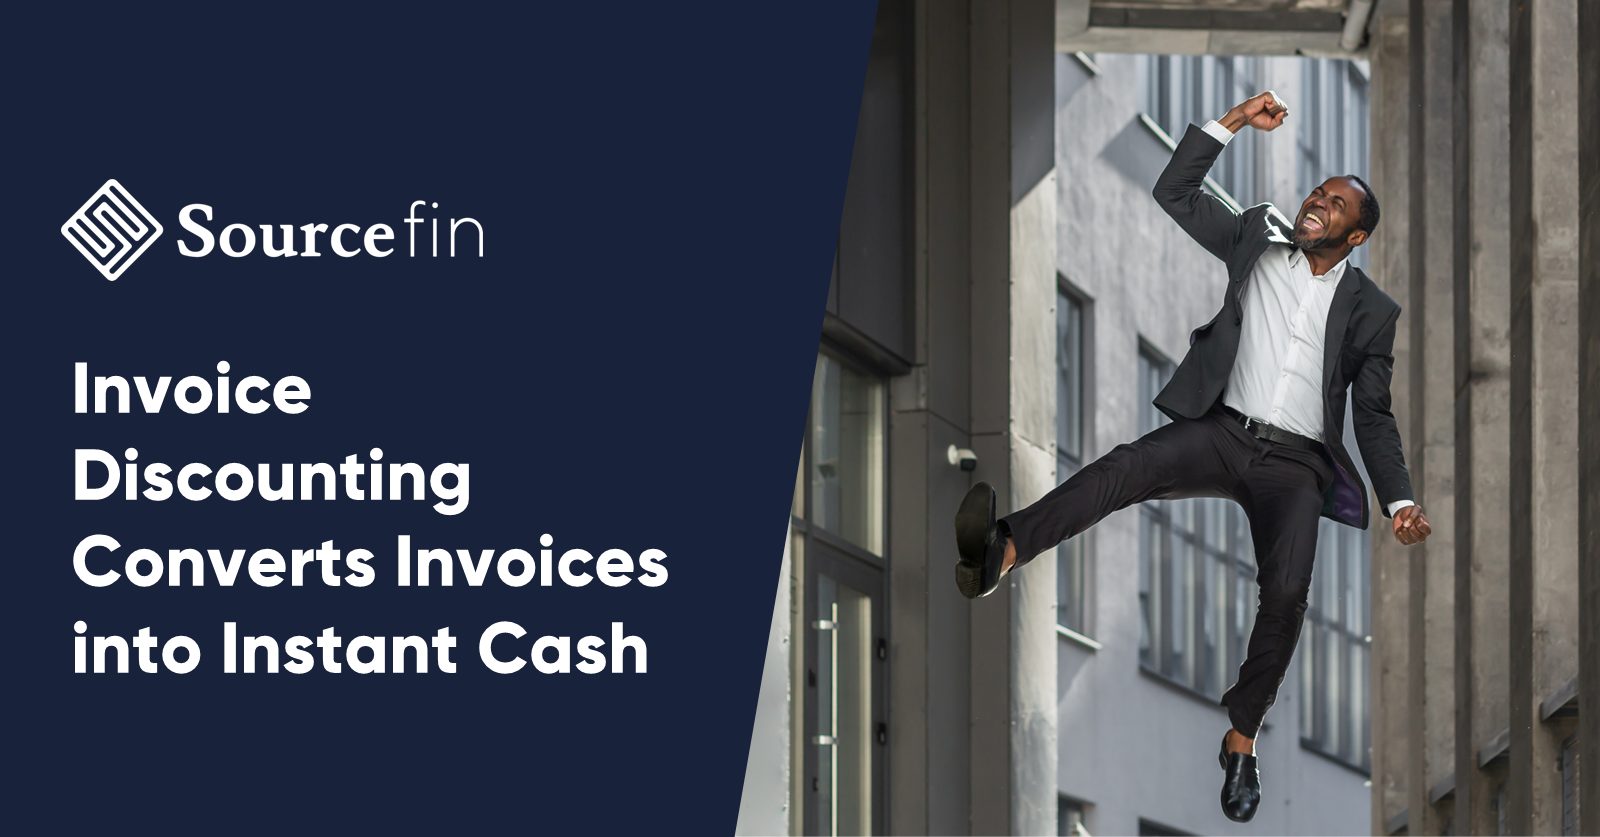 Invoice Discounting Converts Invoices into Instant Cash